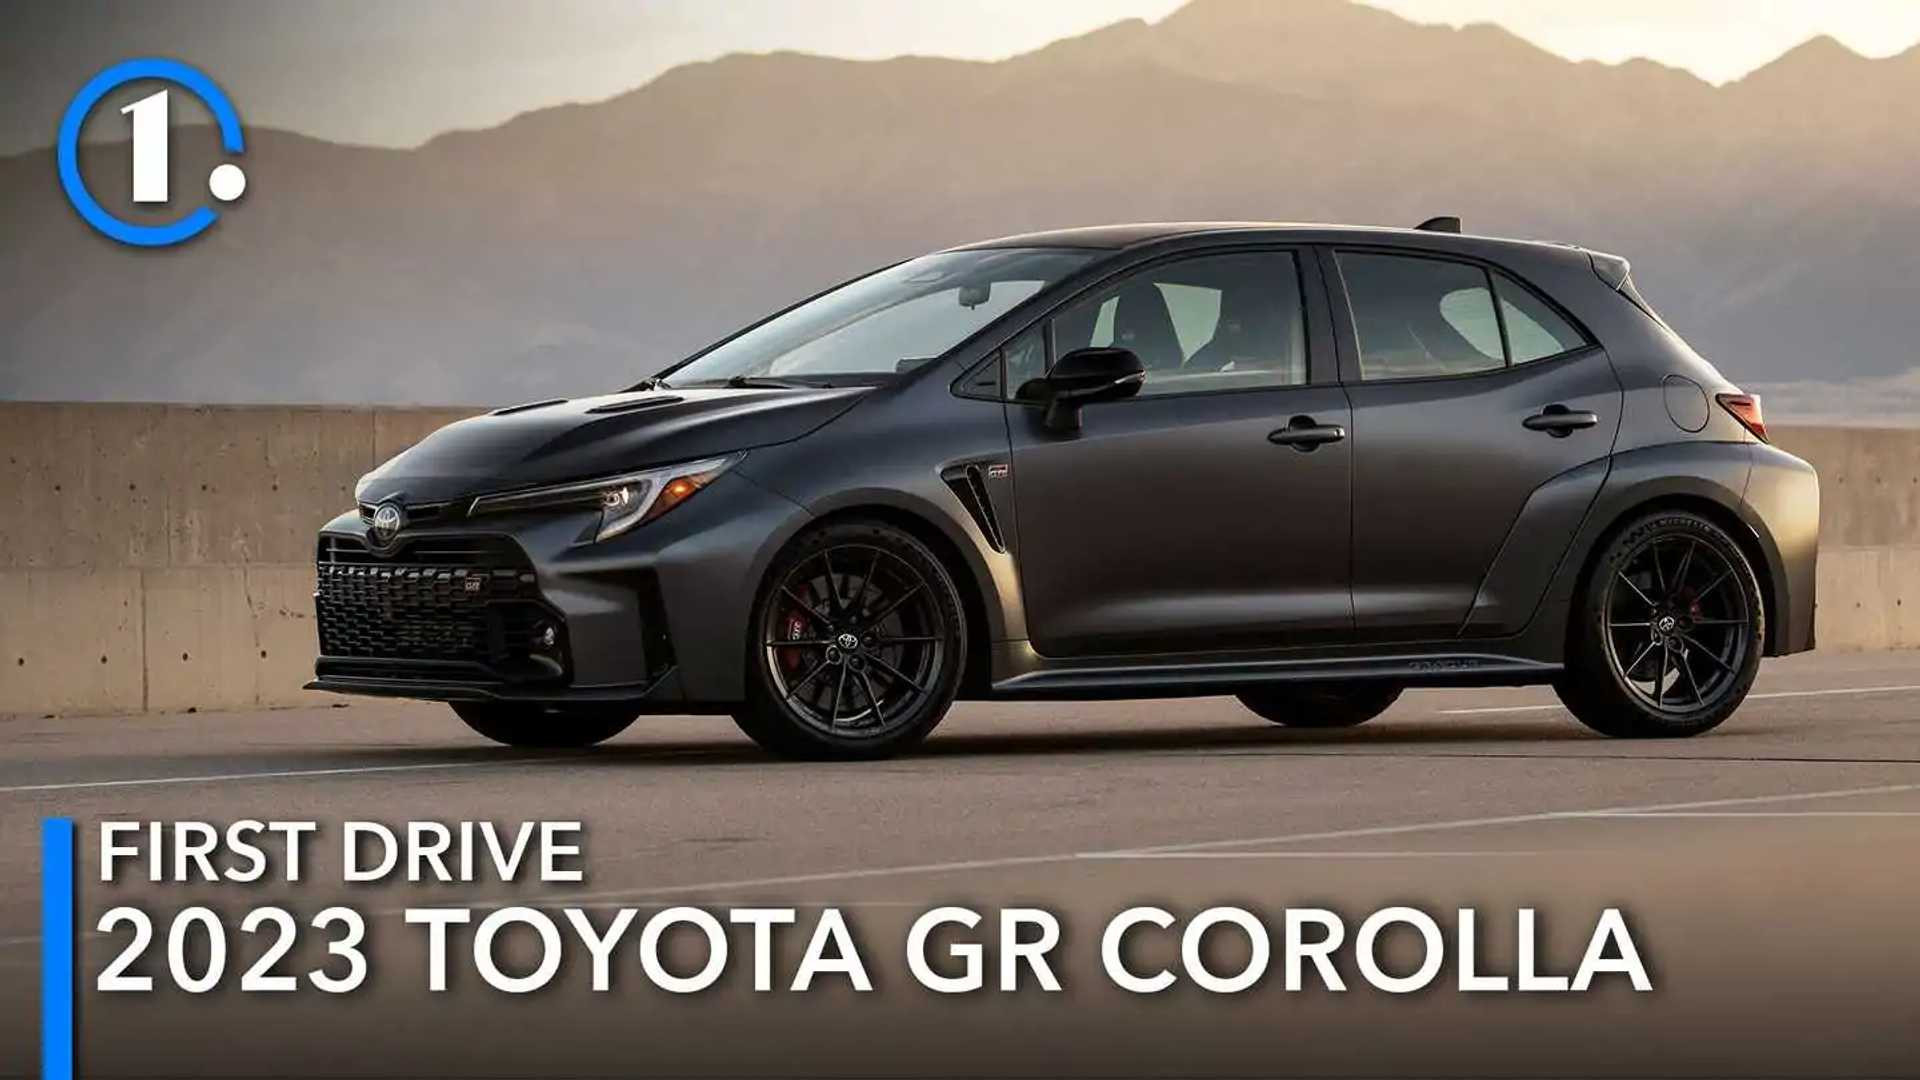 Toyota Corolla Gr 2023 0 60 Research New